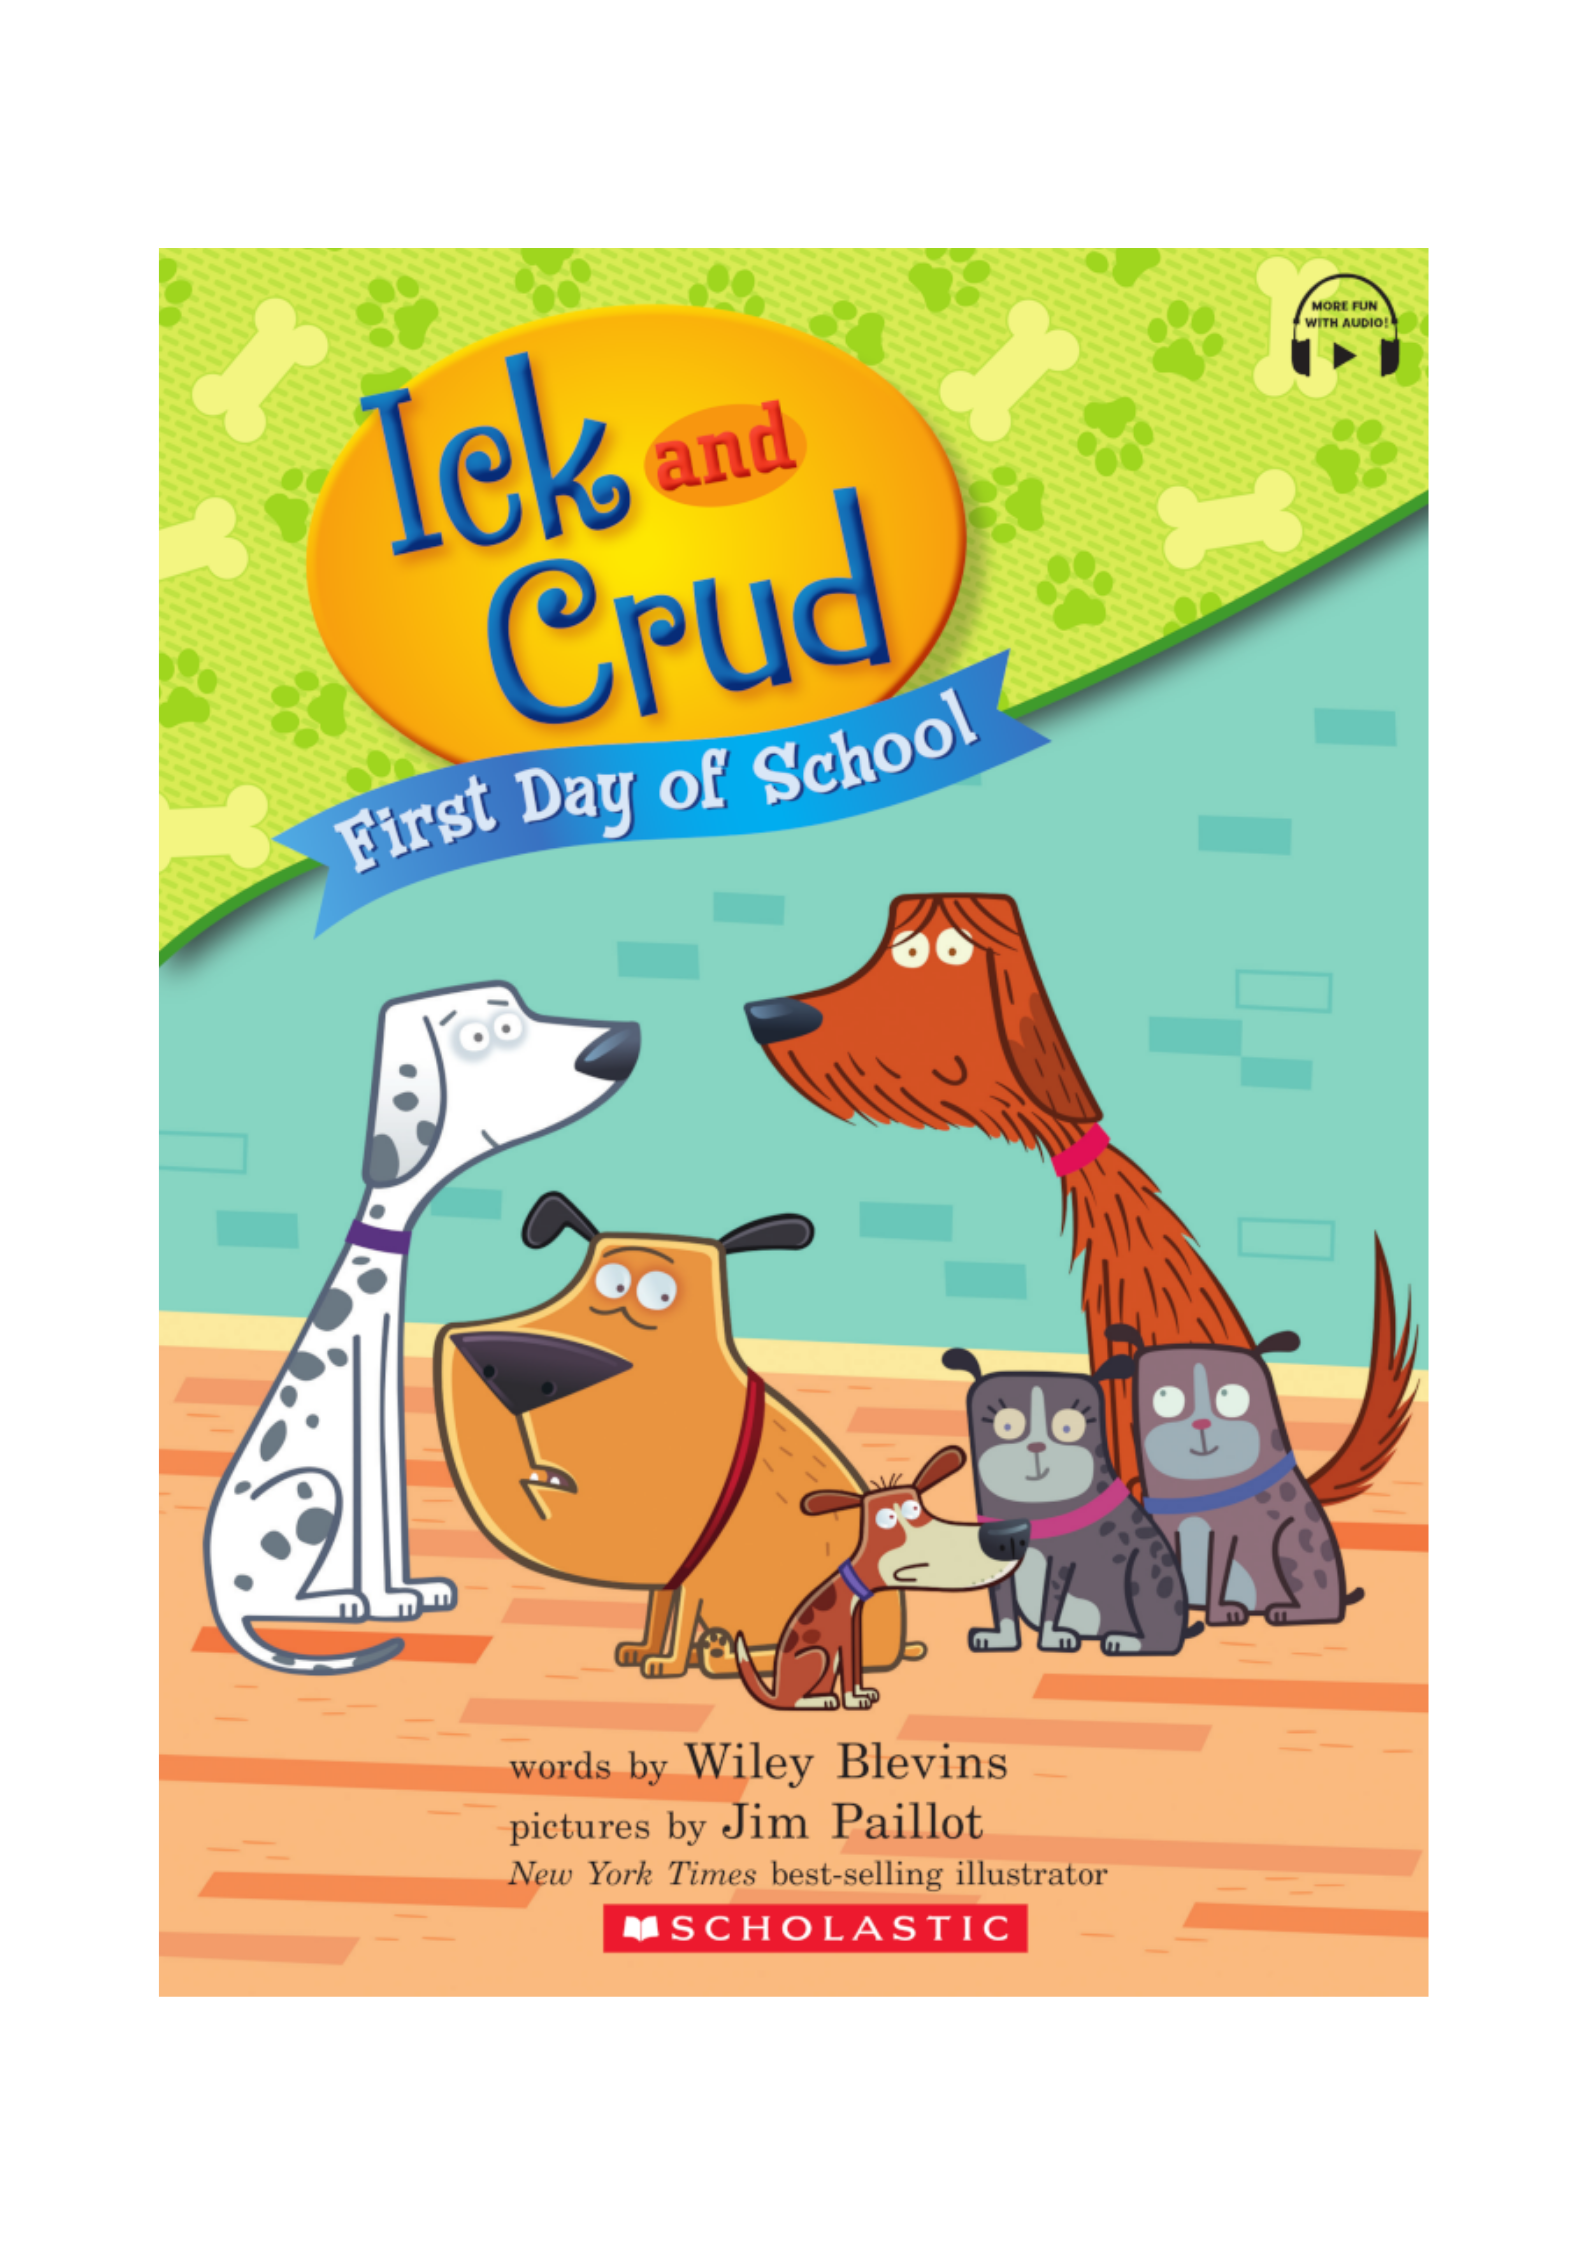 Ick and Crud: First Day of School